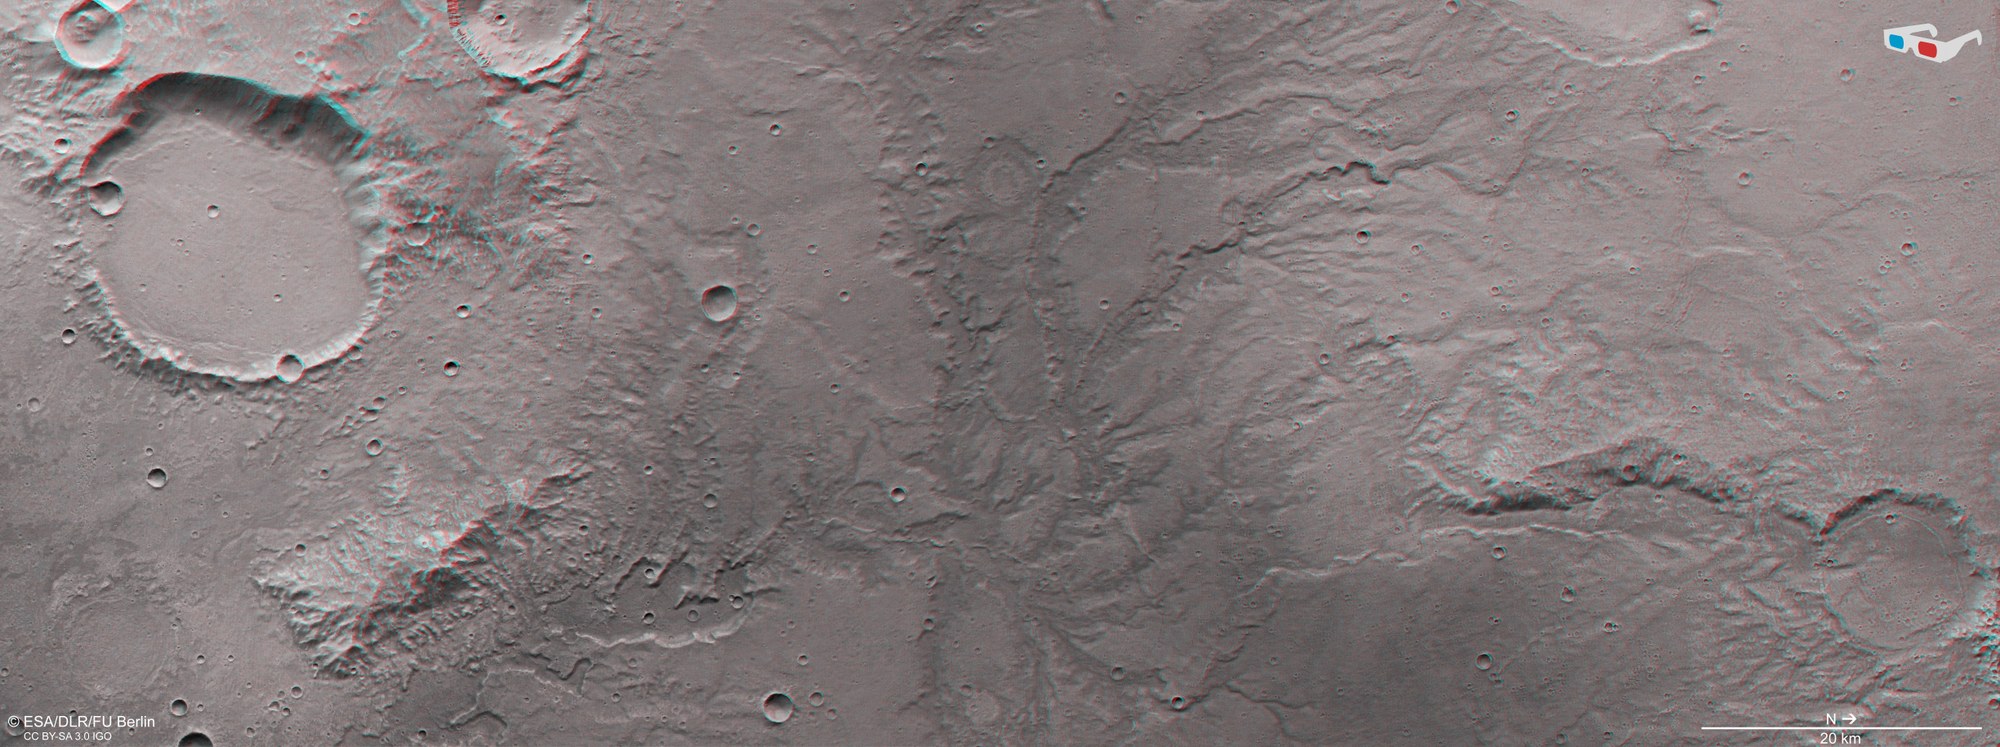 Three-dimensional view of a valley network east of Huygens Crater